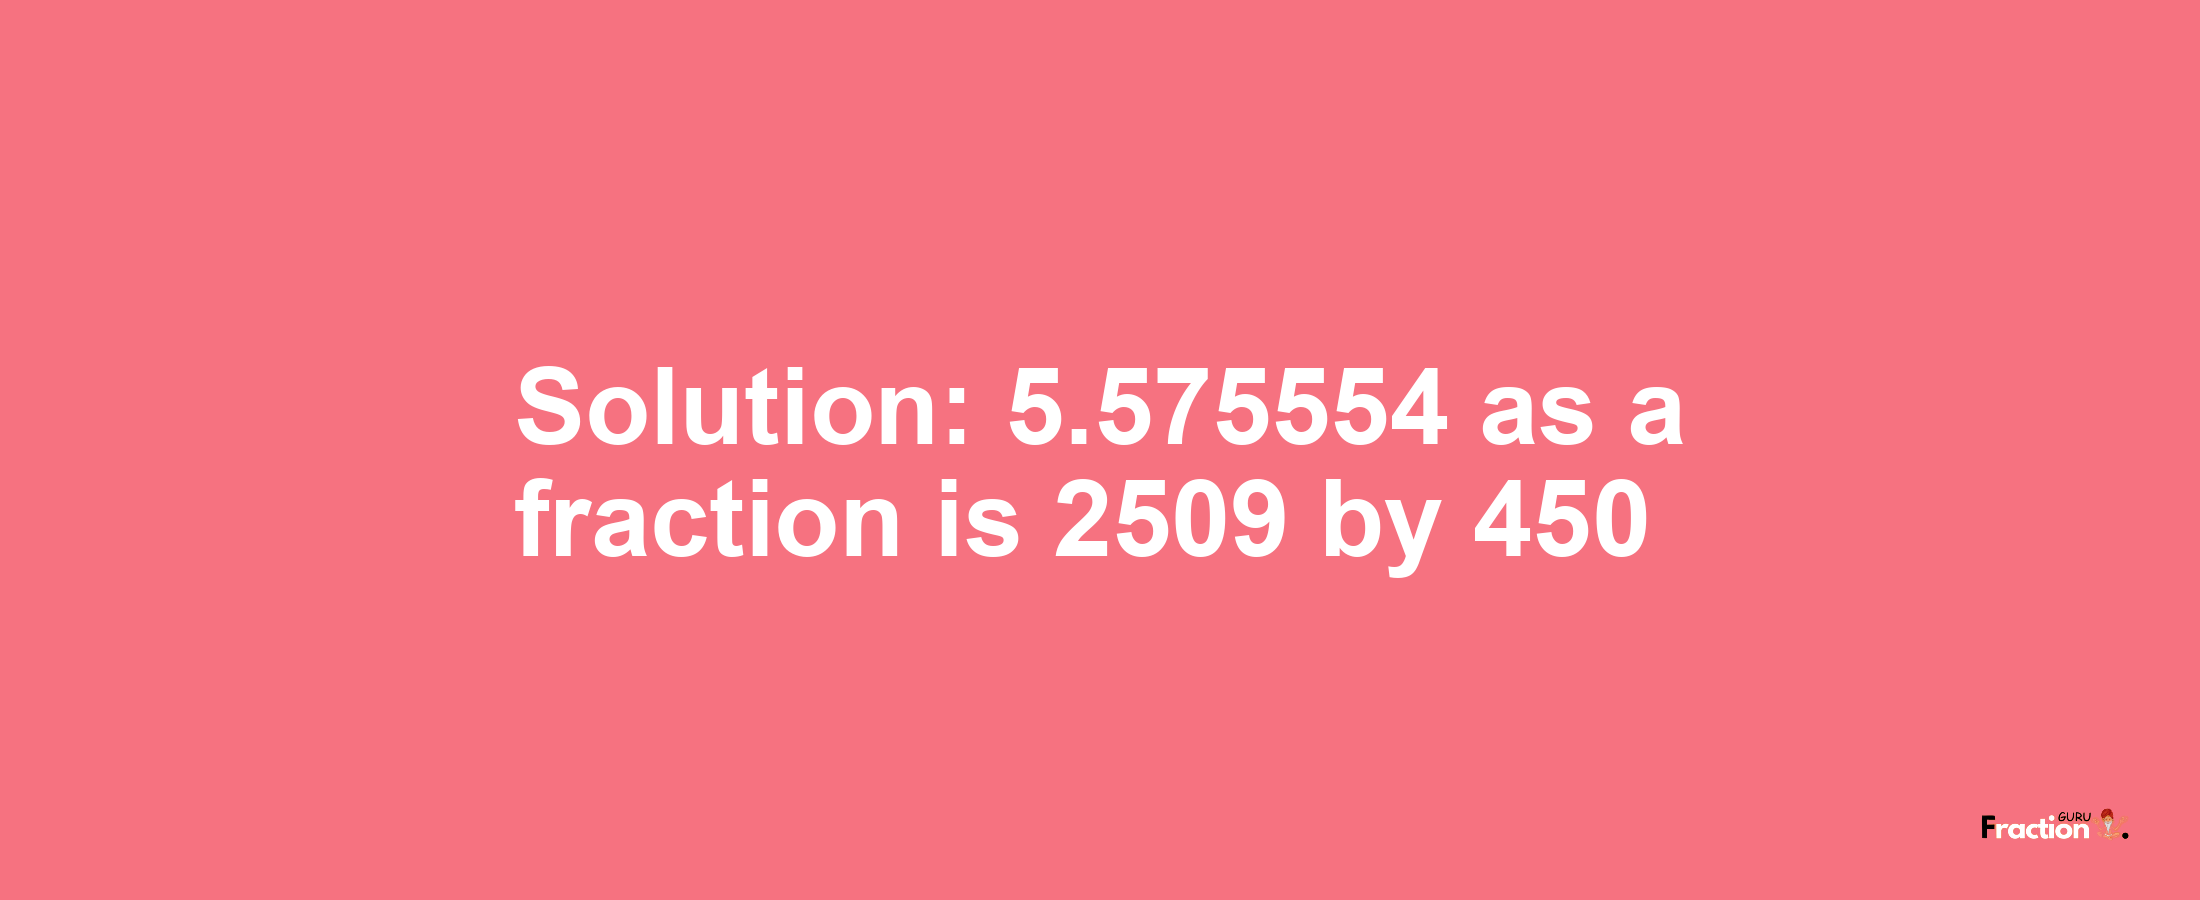 Solution:5.575554 as a fraction is 2509/450